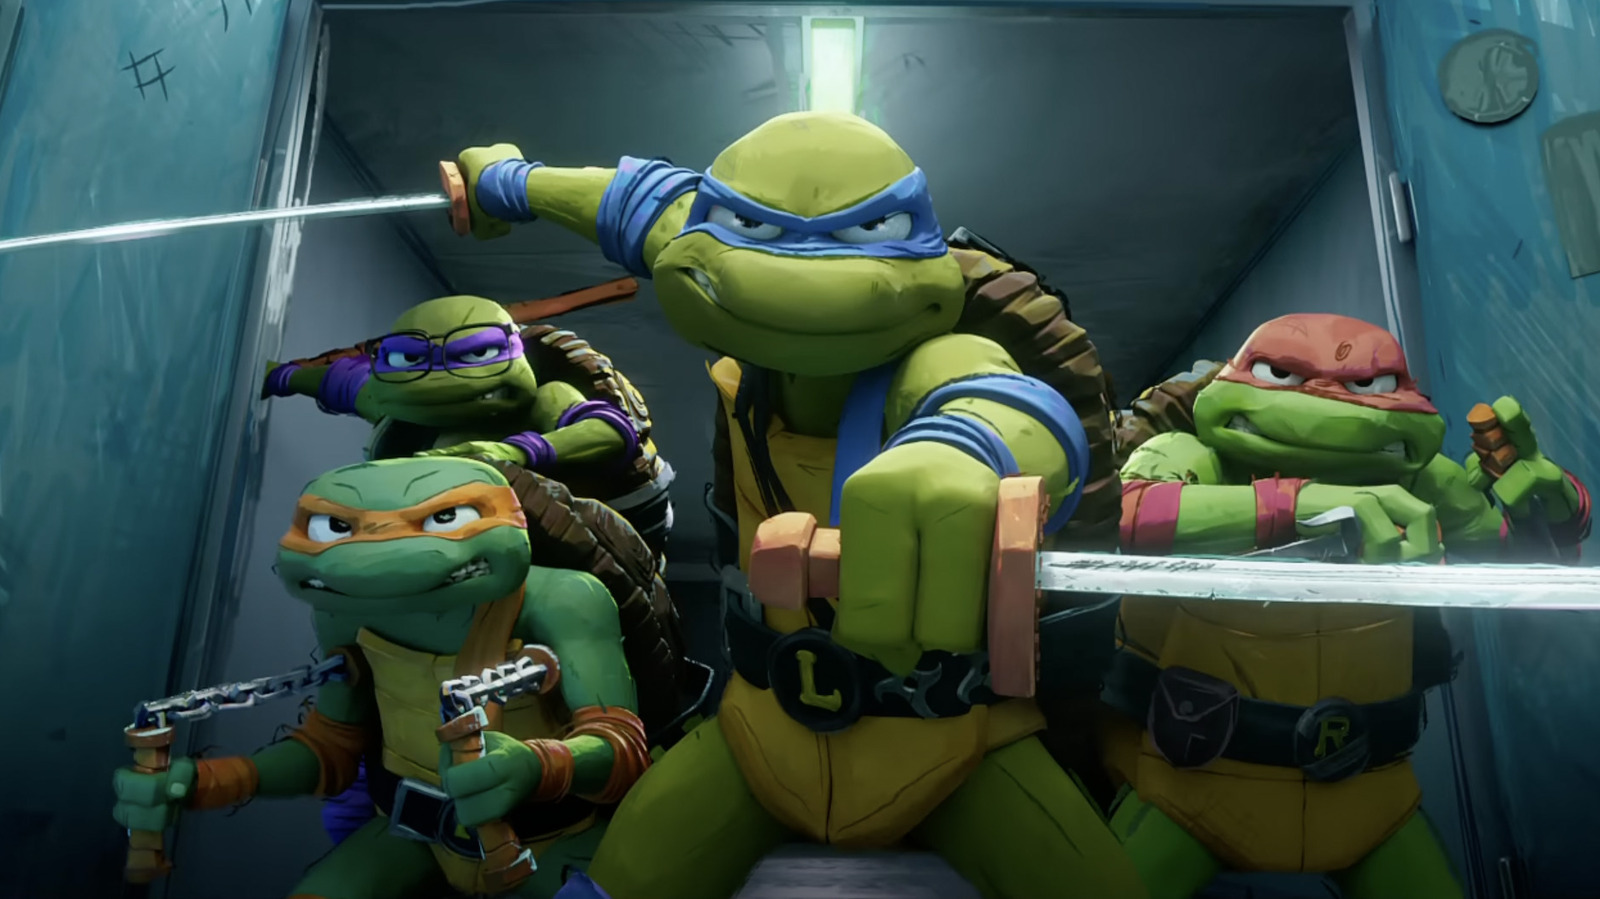 https://www.looper.com/img/gallery/tmnt-mutant-mayhem-reviews-are-in-heres-what-rotten-tomatoes-critics-are-saying/l-intro-1690476694.jpg